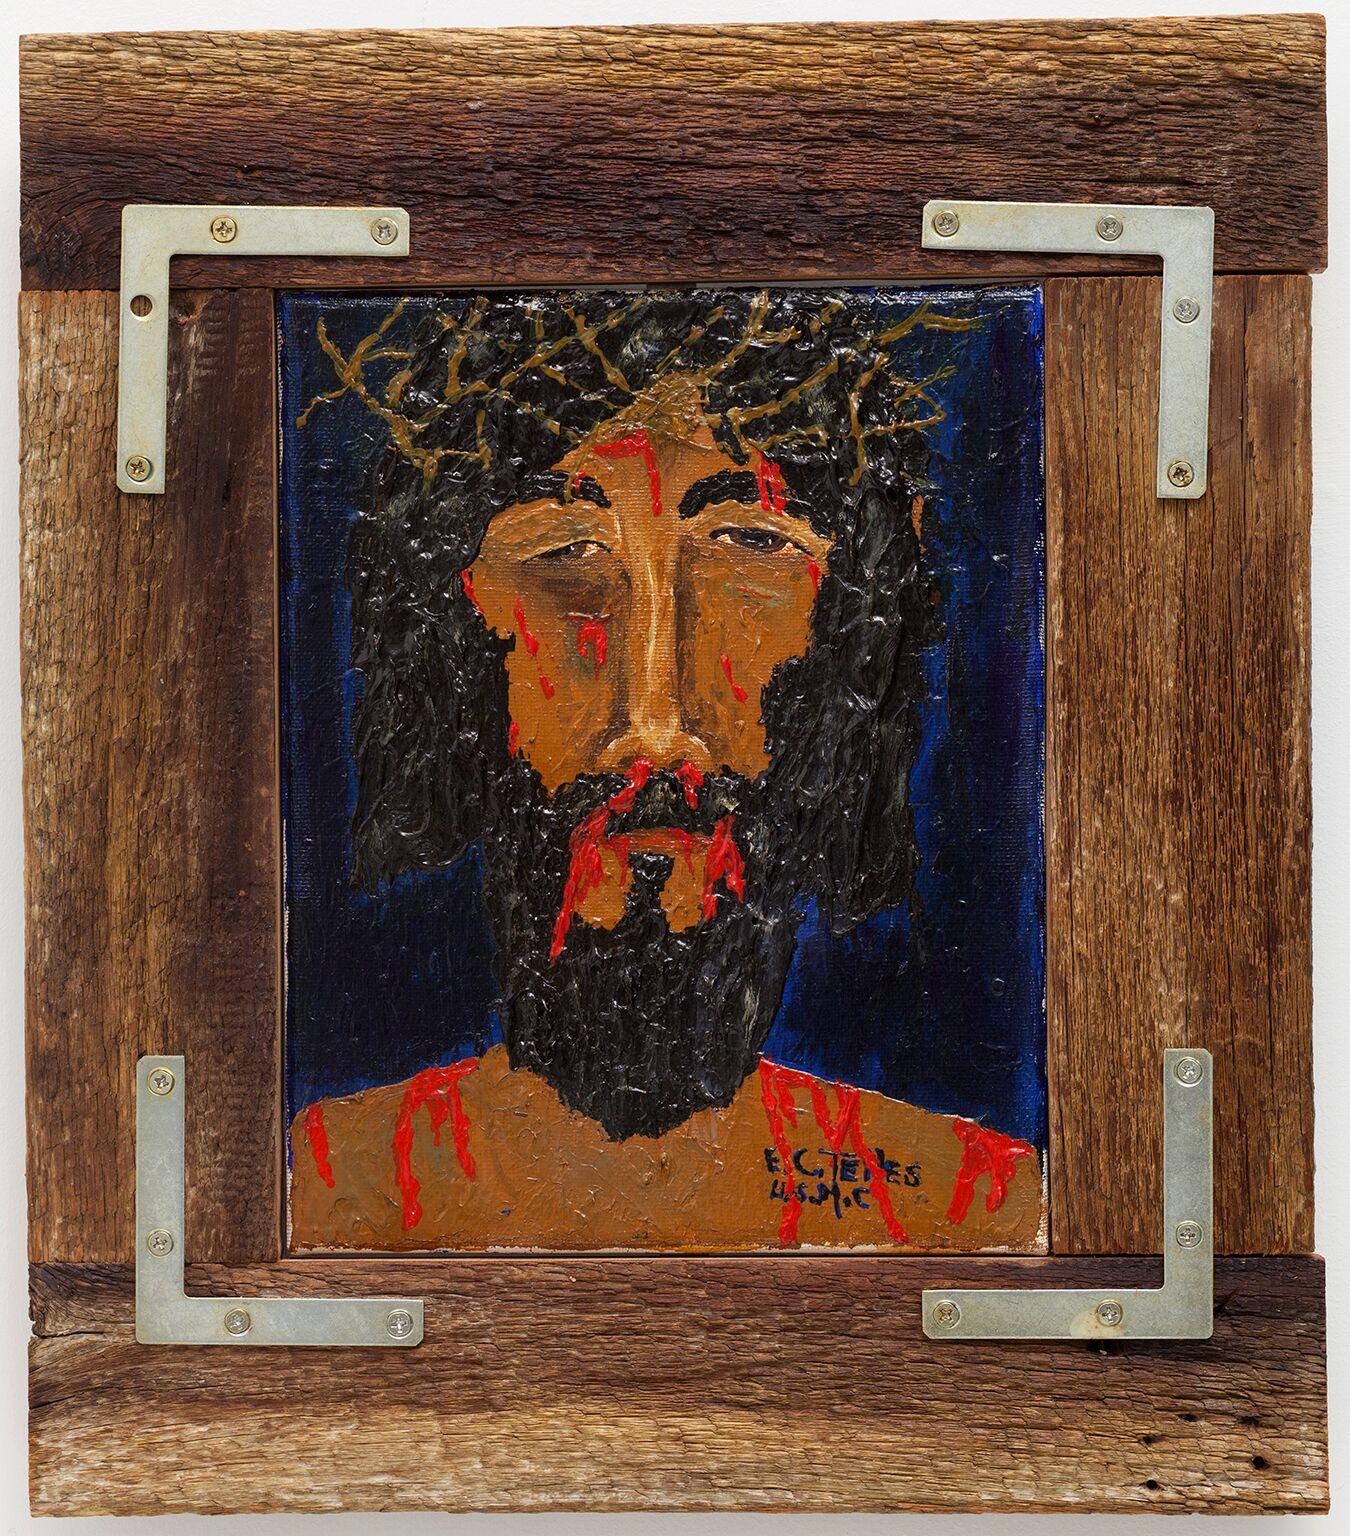 Elias Telles Figurative Painting - "Before the Crucifixion"  Head of Christ, Folk Portrait by Self-Taught Artist